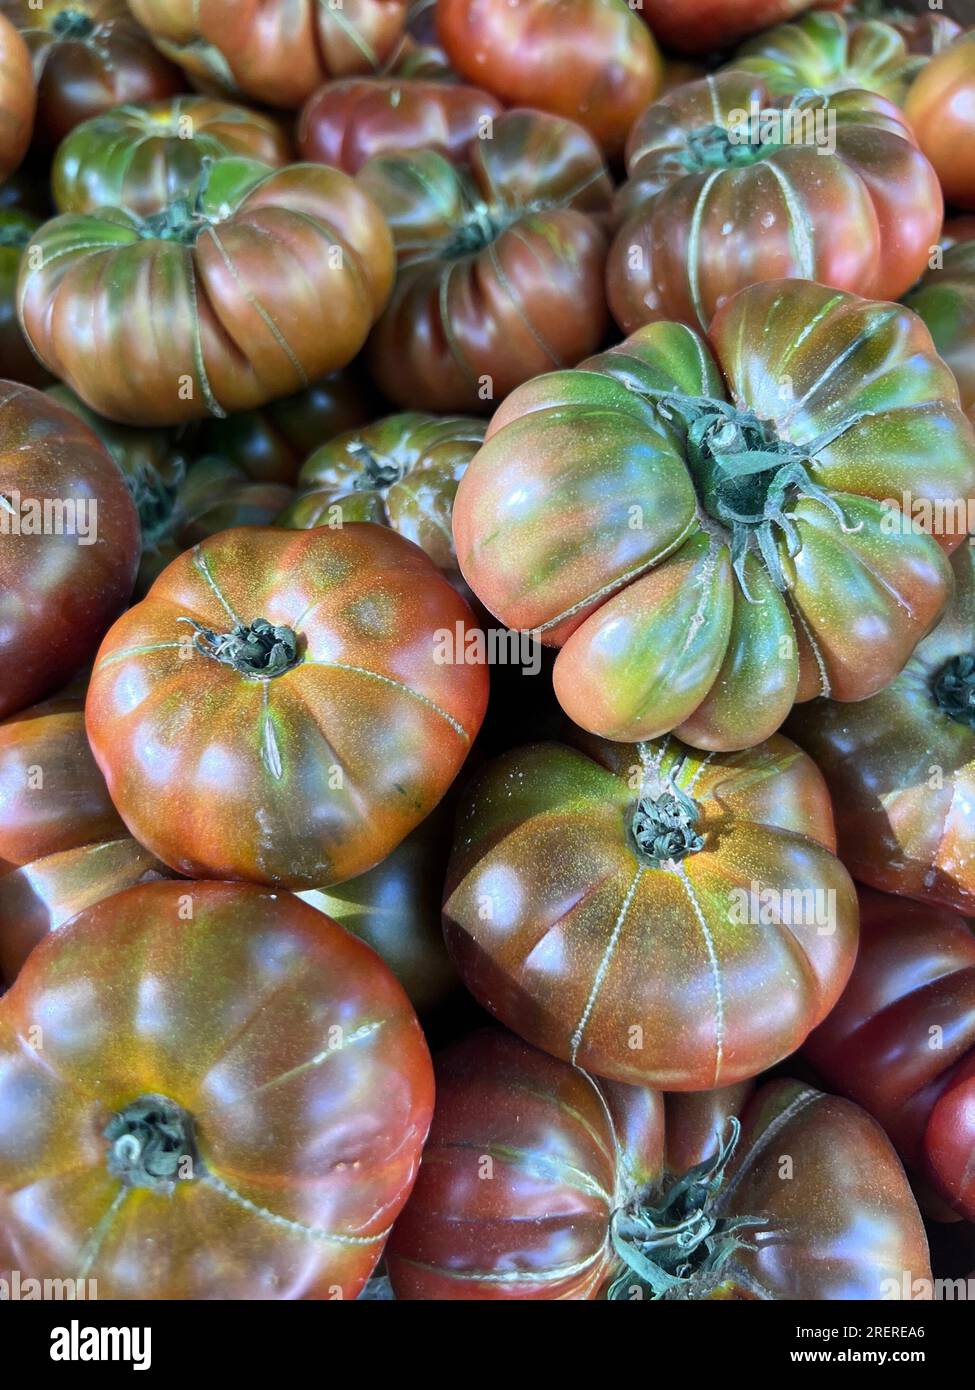 tomatoes displayed in the market for sale Stock Photo